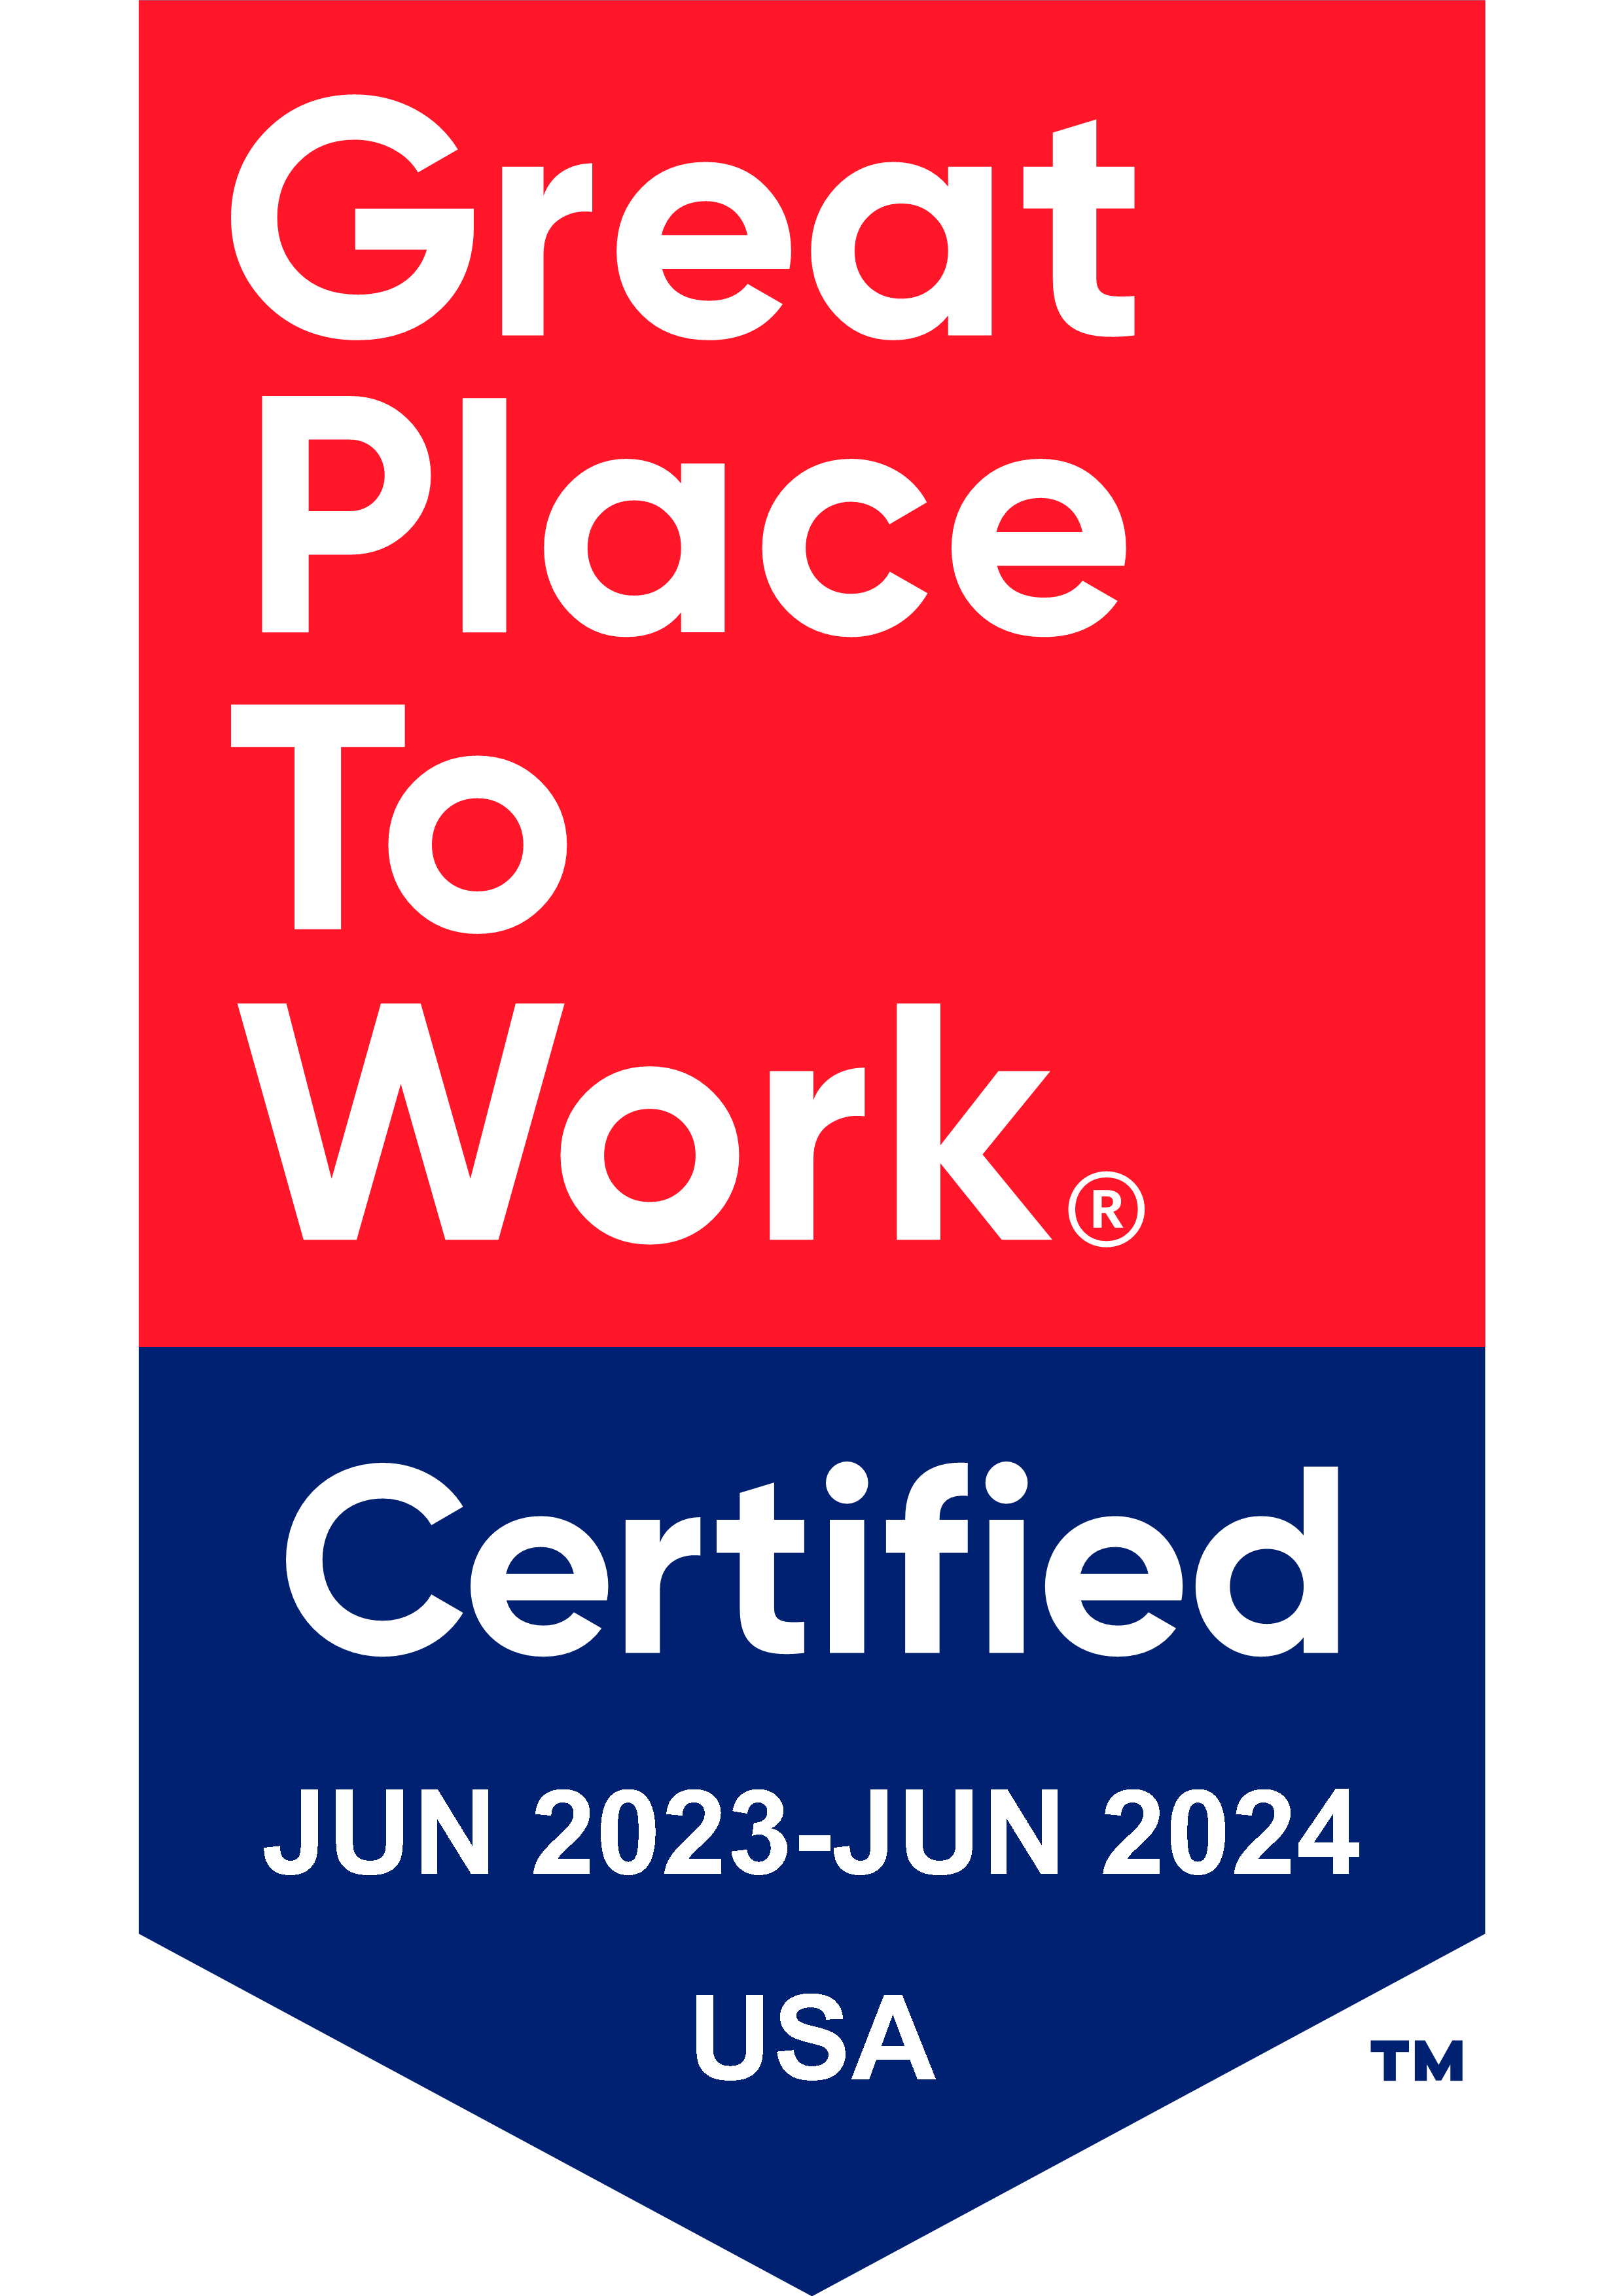 SterlingRisk Has Been Certified as a Great Place to Work! SterlingRisk goes above and beyond customary corporate practices to sustain a work environment in which employees are appreciated, rewarded, and provided the flexibility to balance work commitments with personal and family obligations.